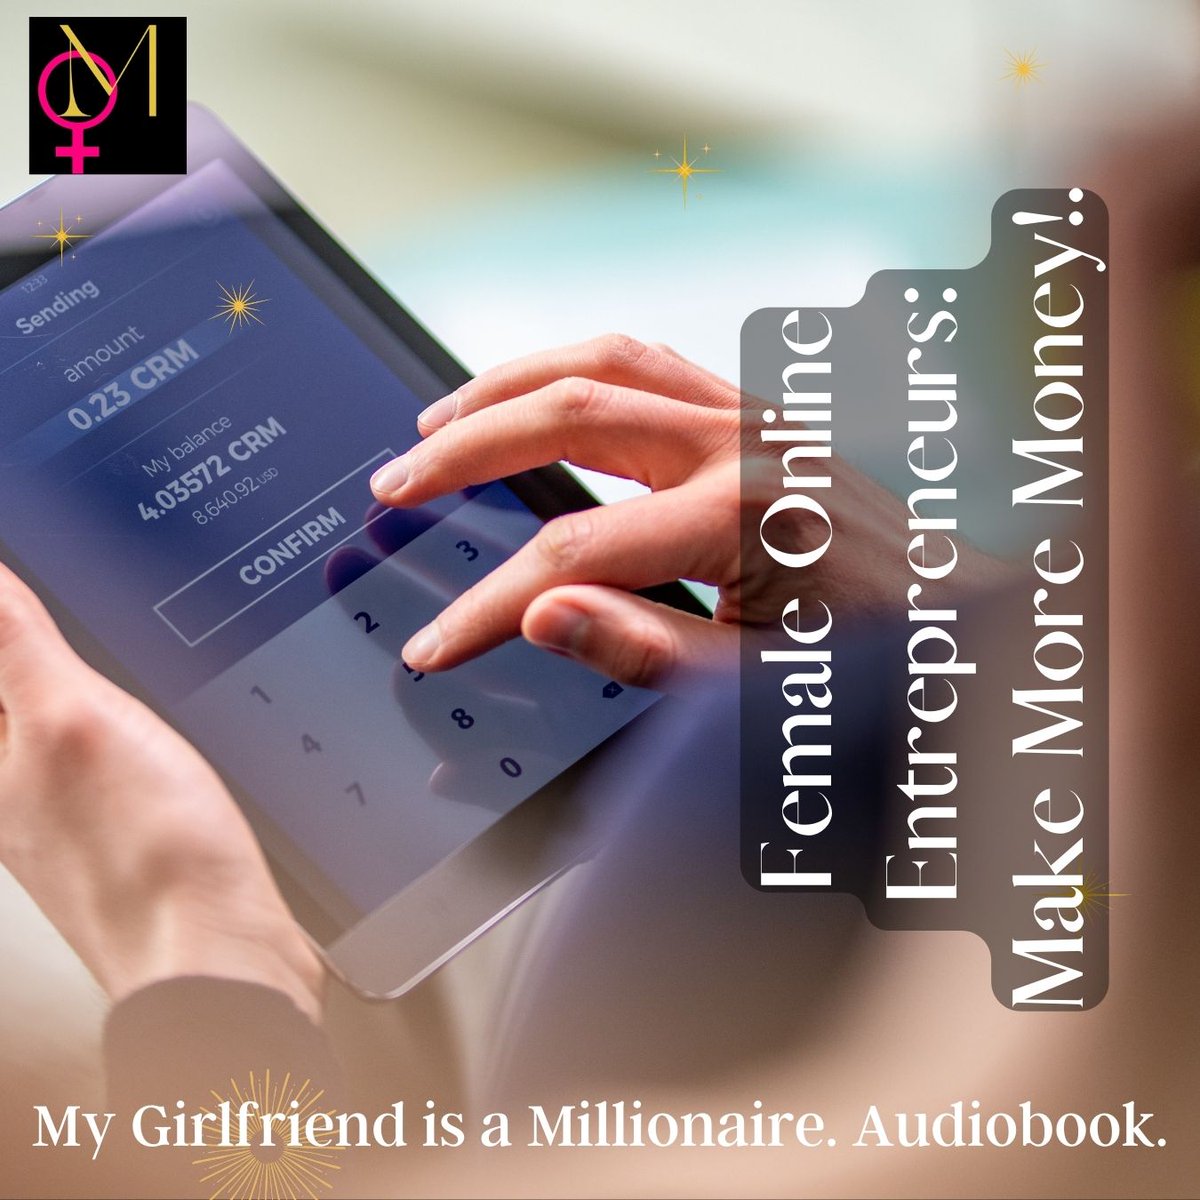 Female #OnlineEntrepreneurs: #Makemoremoney! No matter with what: #printondemand, #airbnb, #cryptotrading, #stocktrading, #forextrading, #amazon or #dropshipping. This #Audibook is for you: My Girlfriend is a Millionaire!